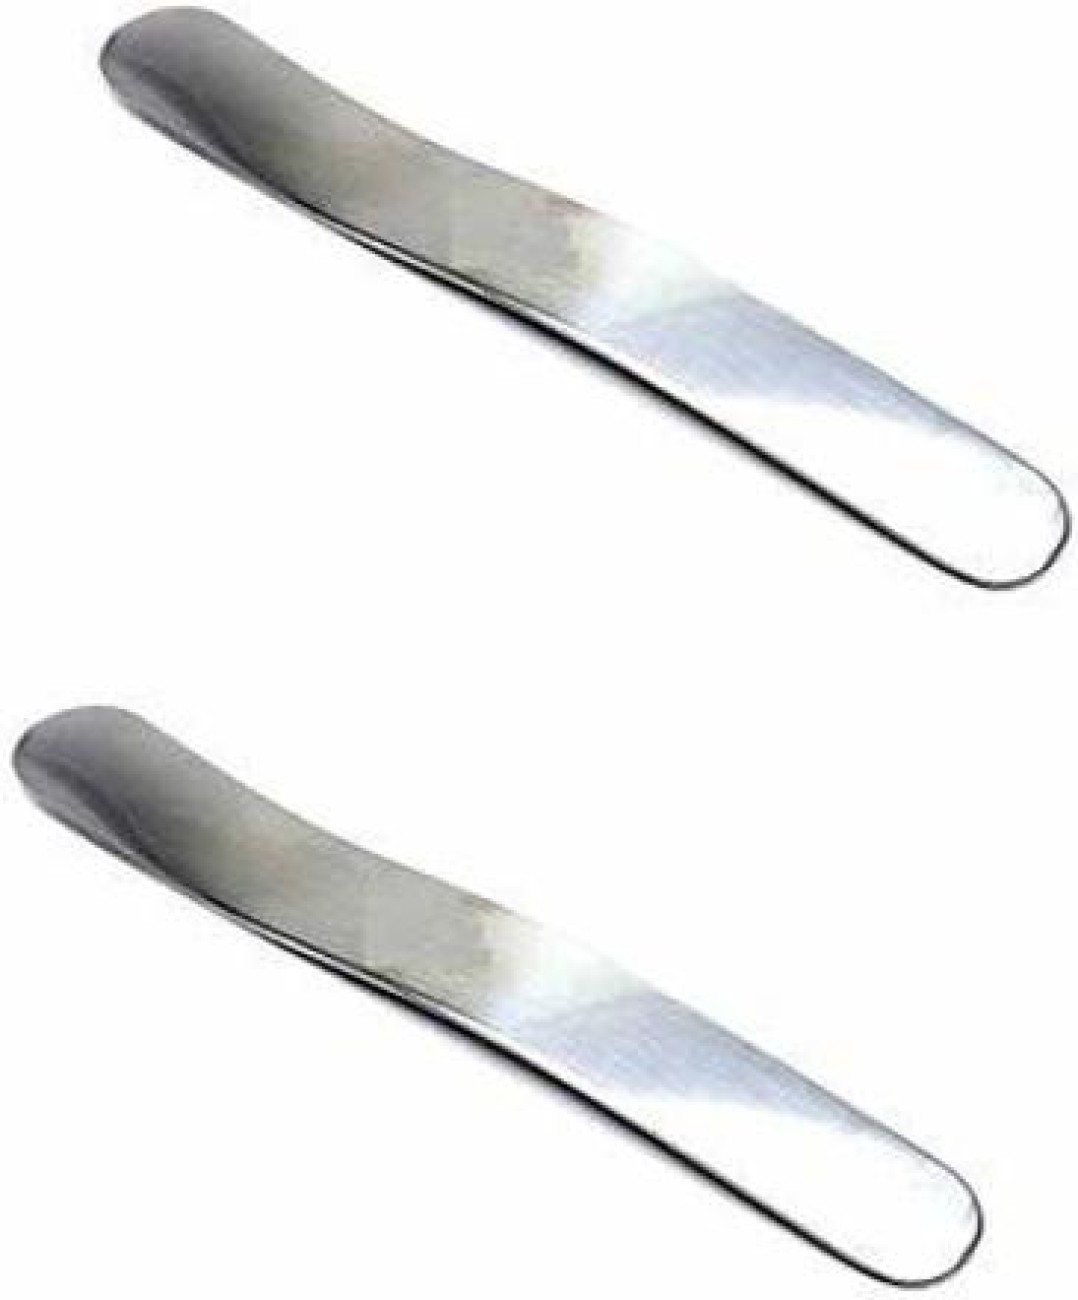 Stainless Steel L-Shape Tongue Depressor (Set of 3 Pieces)